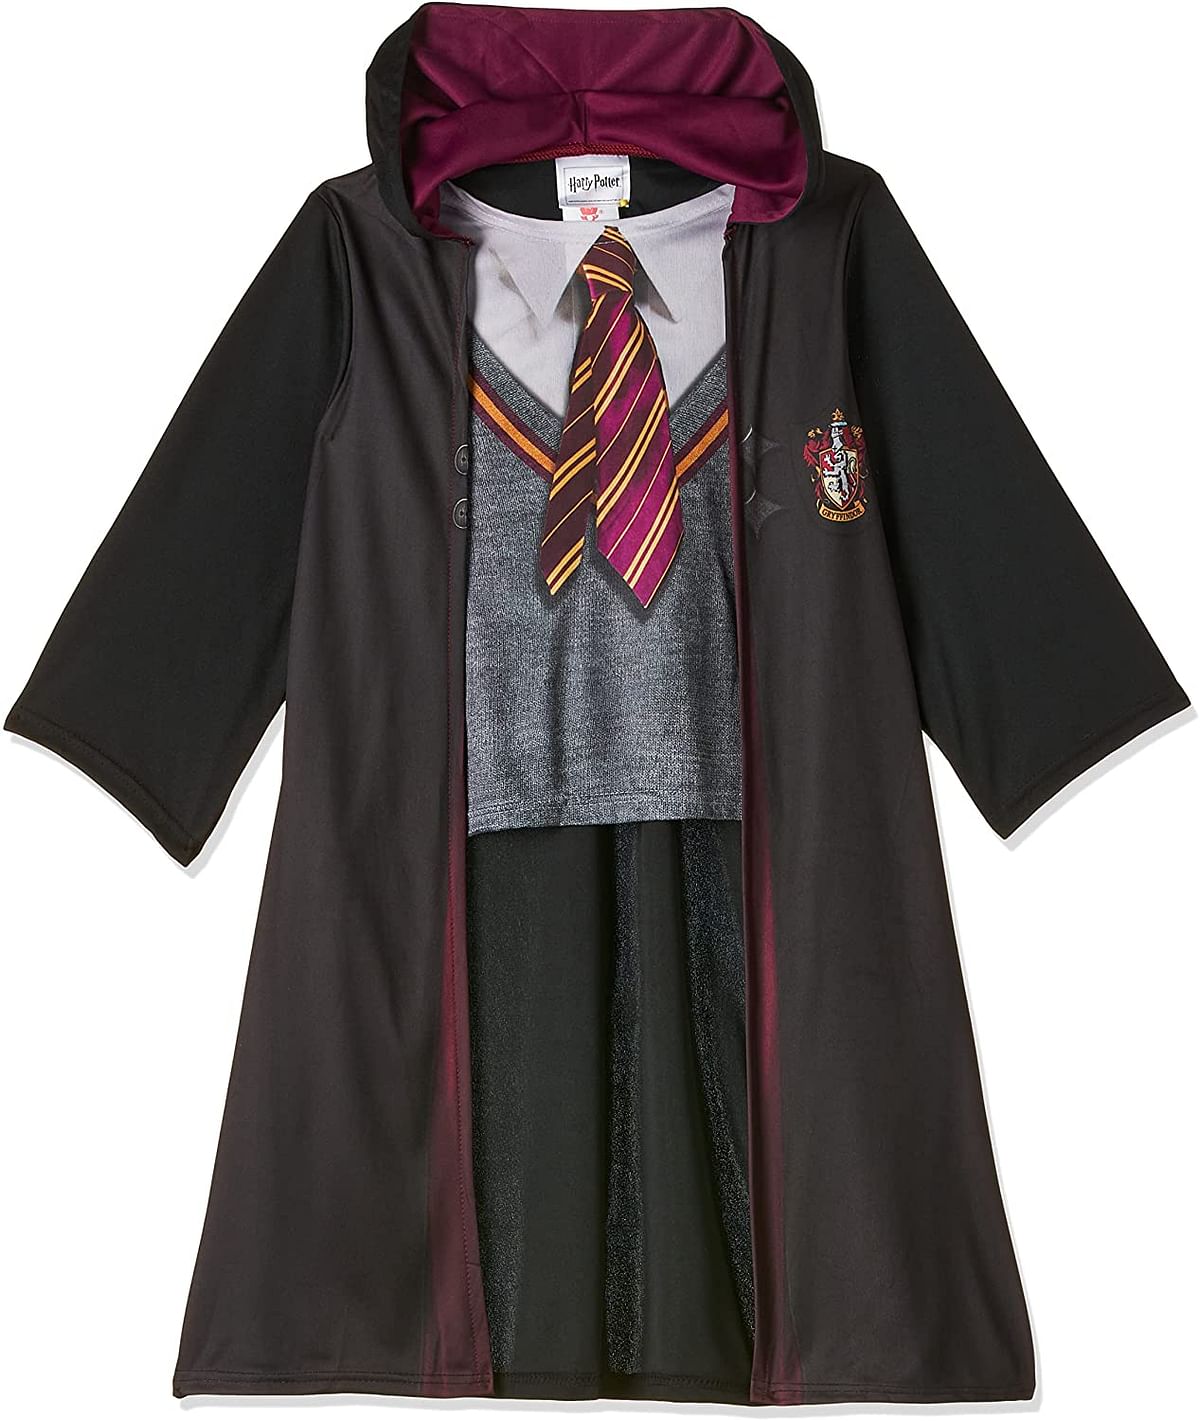 Harry Potter Robe Kids Costume 3 Year Multi Color